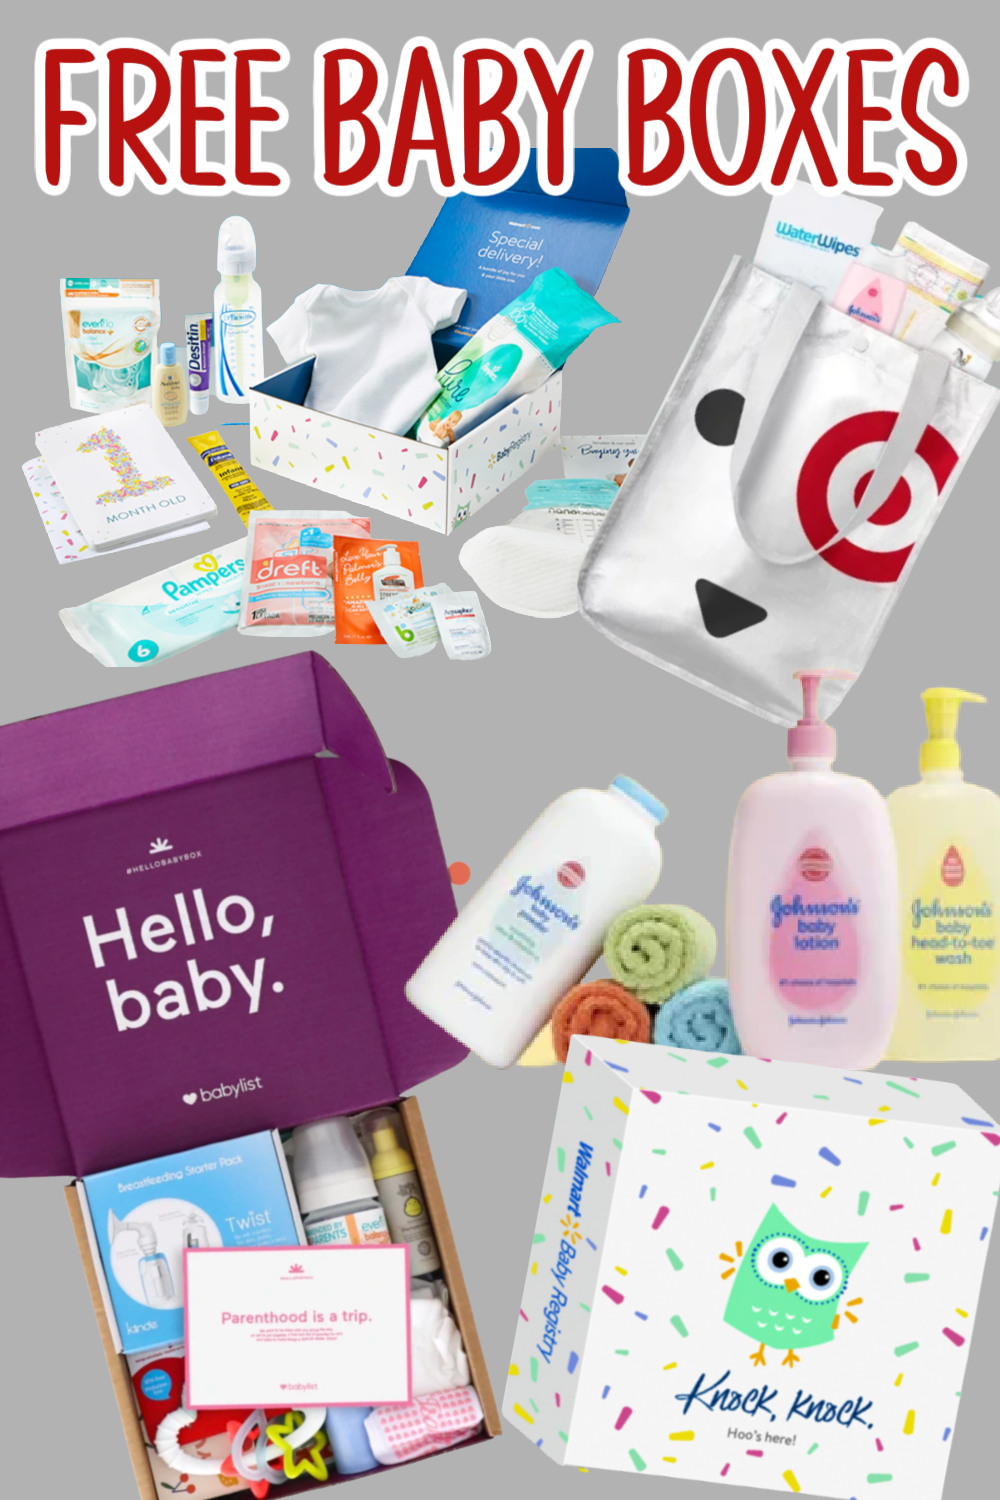 Free baby gift samples